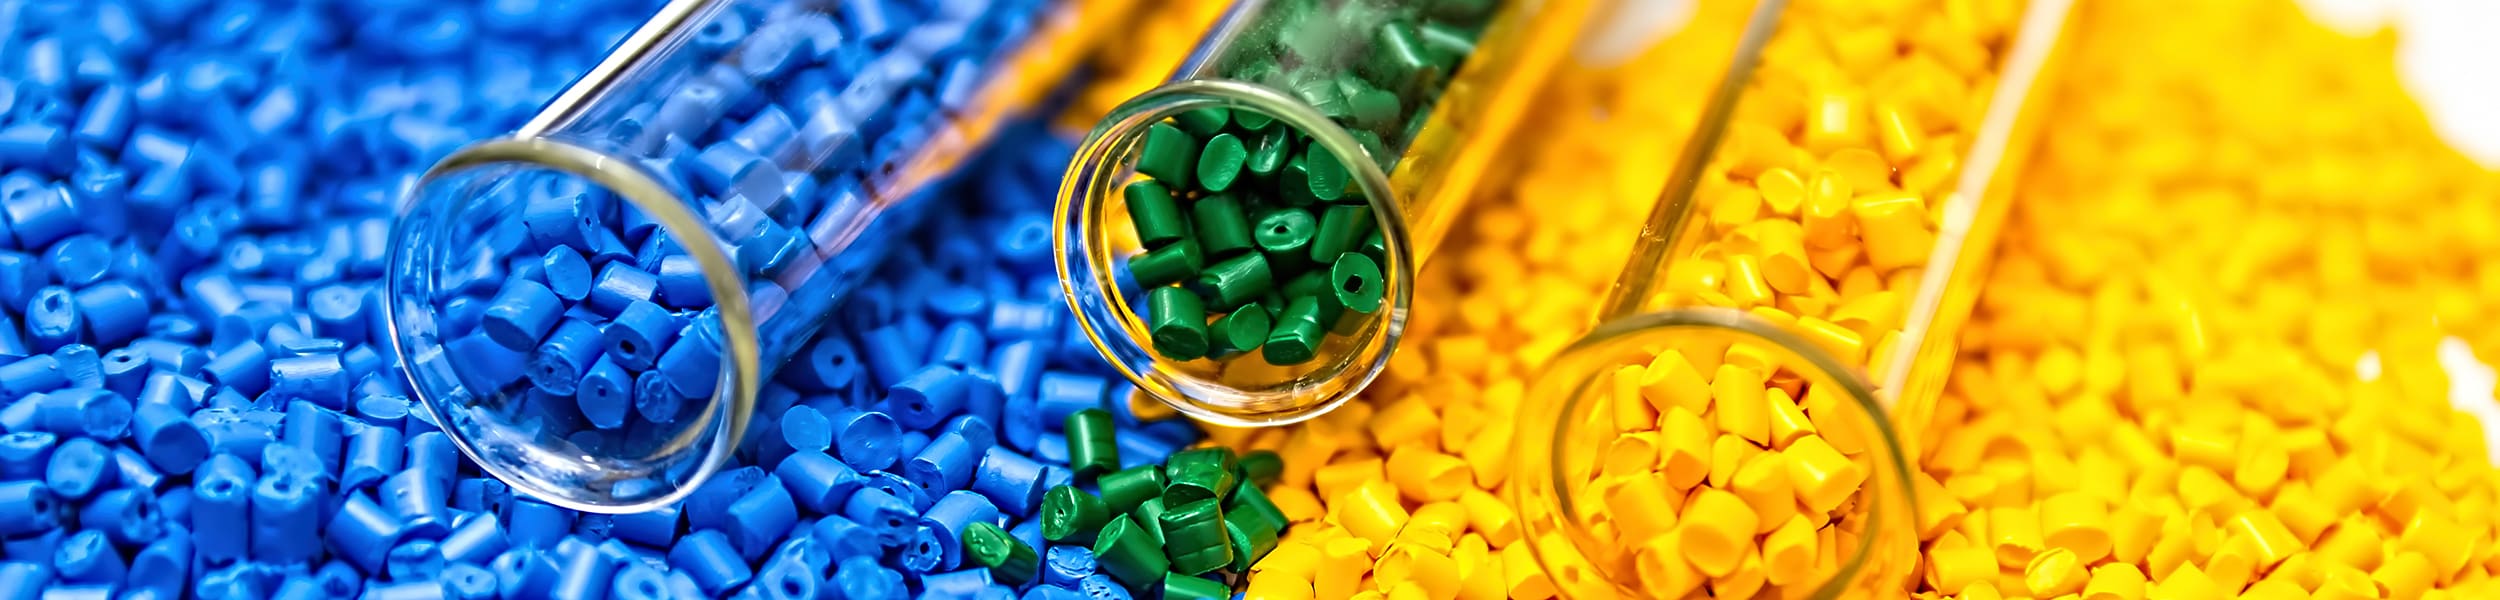 Aurora Plastics takes pride in our ability to custom compound nearly any specialty additive or filler that our customers would need including specific colors.